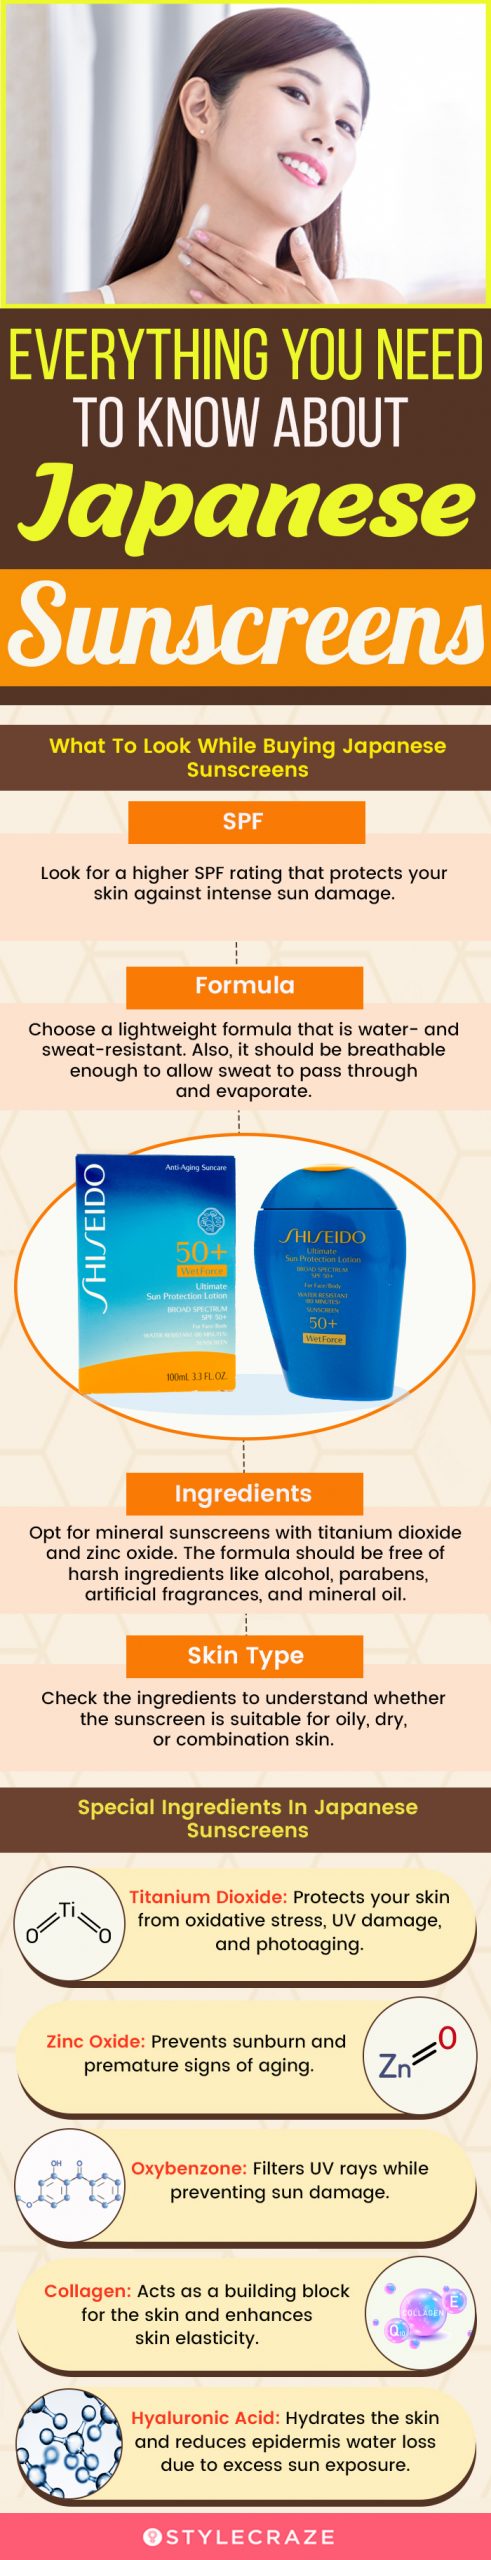 Everything You Need To Know About Japanese Sunscreens  [infographic]